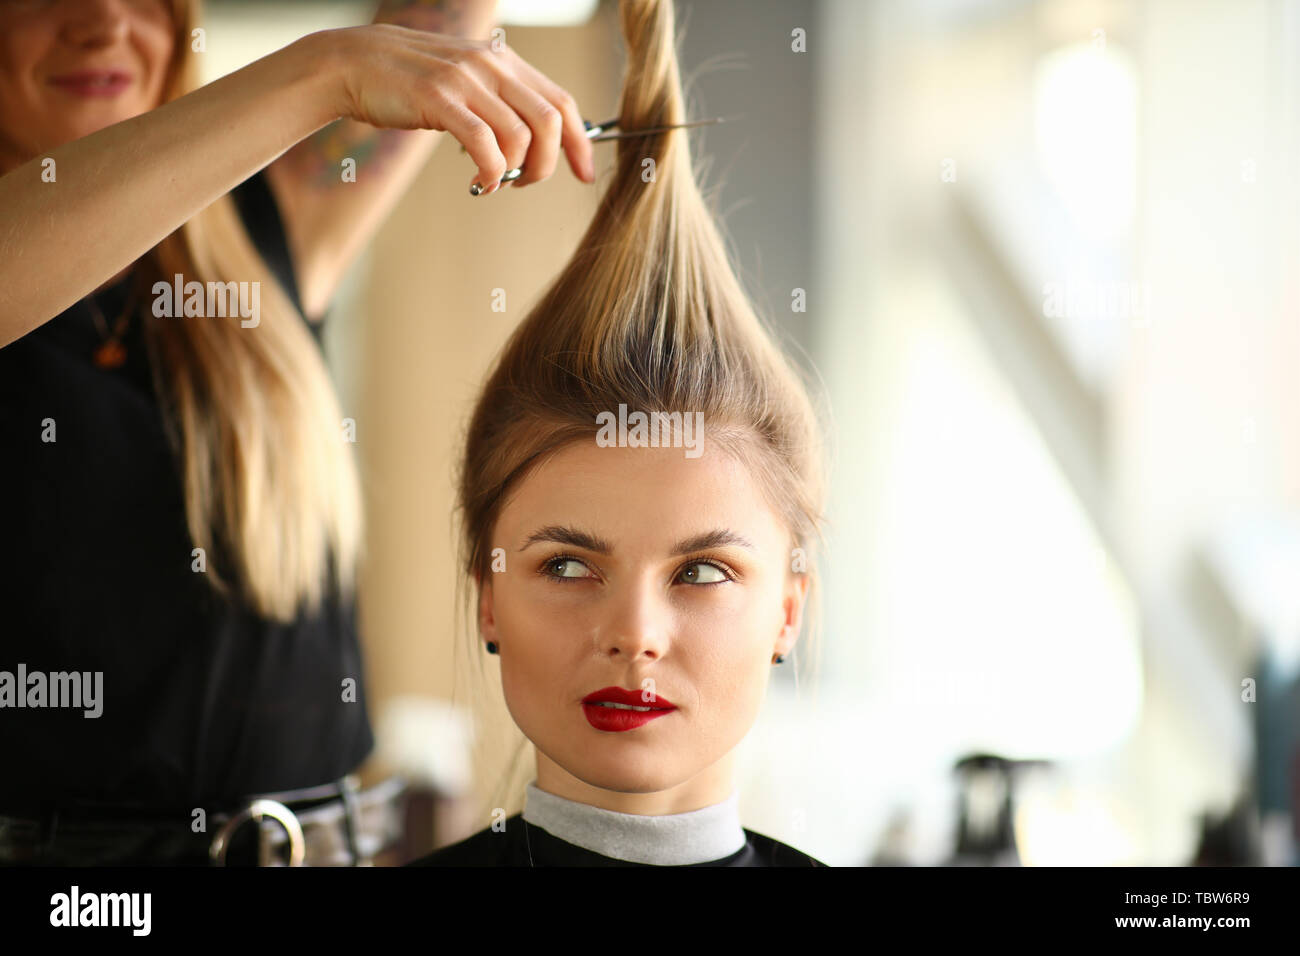 Hairdresser Cutting Hair to Blonde Woman Portrait. Woman with Ponytail  Getting Haircut with Scissors in Beauty Salon. Female with Funny Hairstyle.  Hai Stock Photo - Alamy